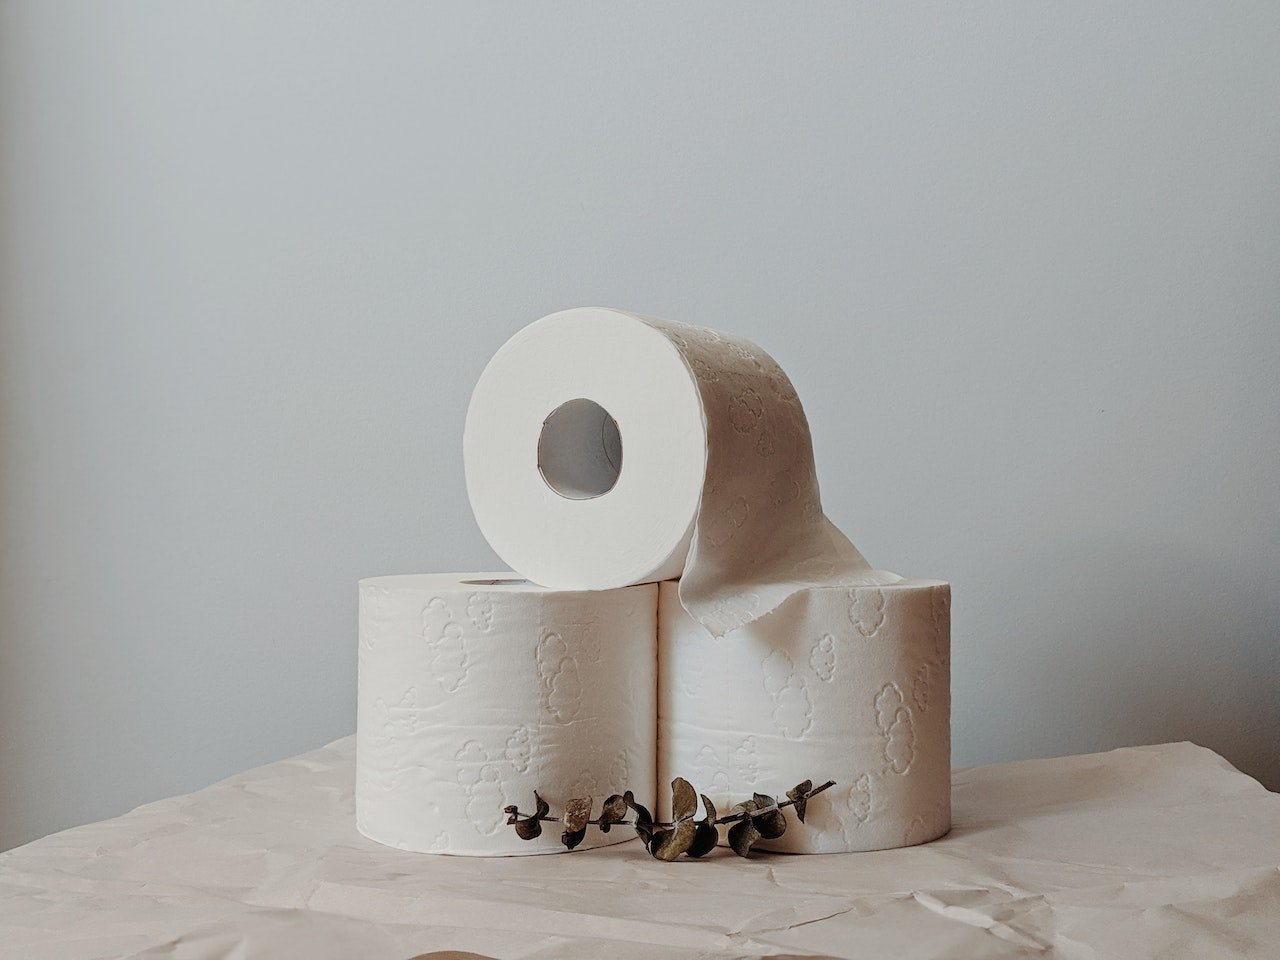 how is bamboo toilet paper made